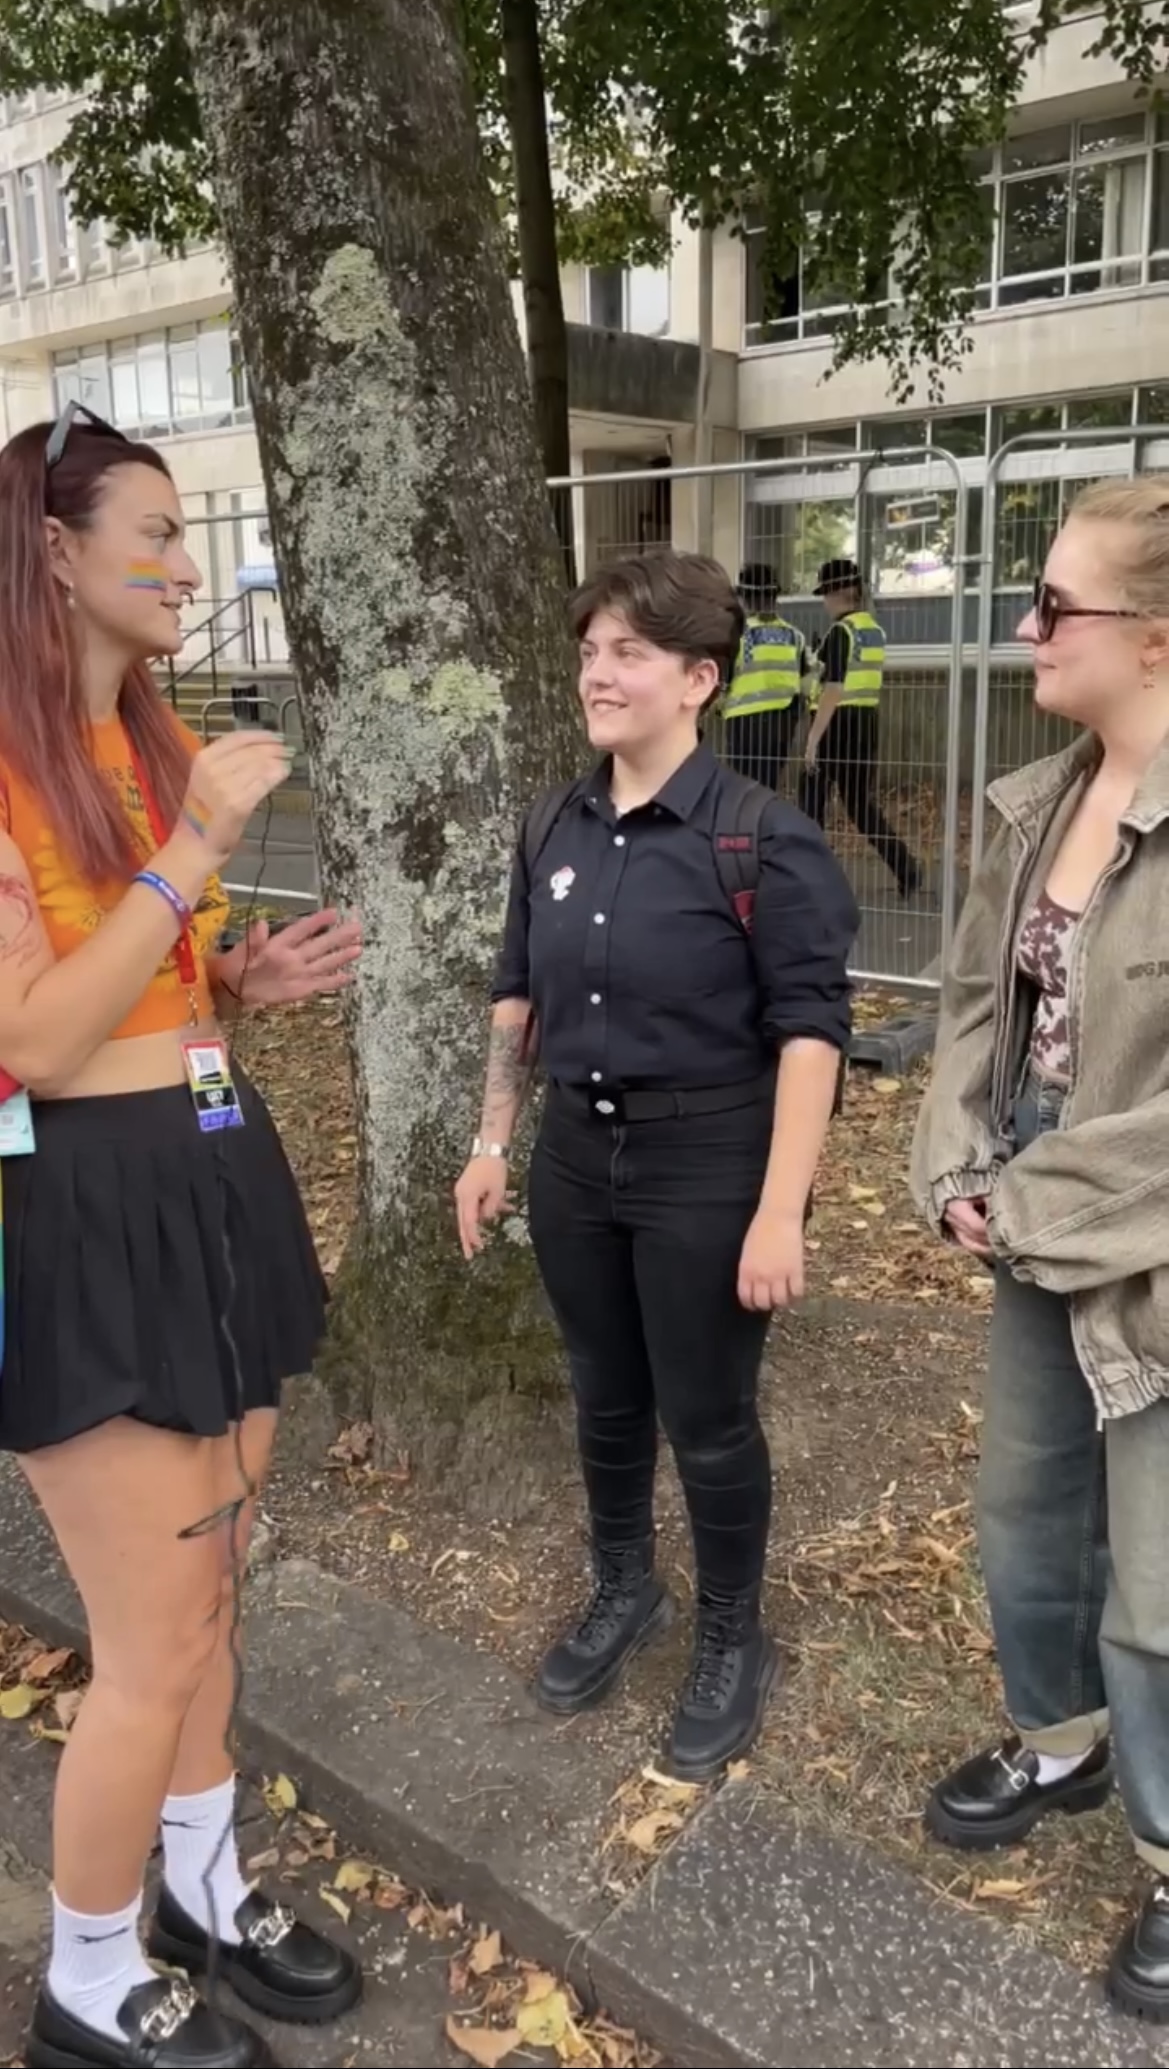 Red haired woman (me) is interviewing two other women at Pride Cymru